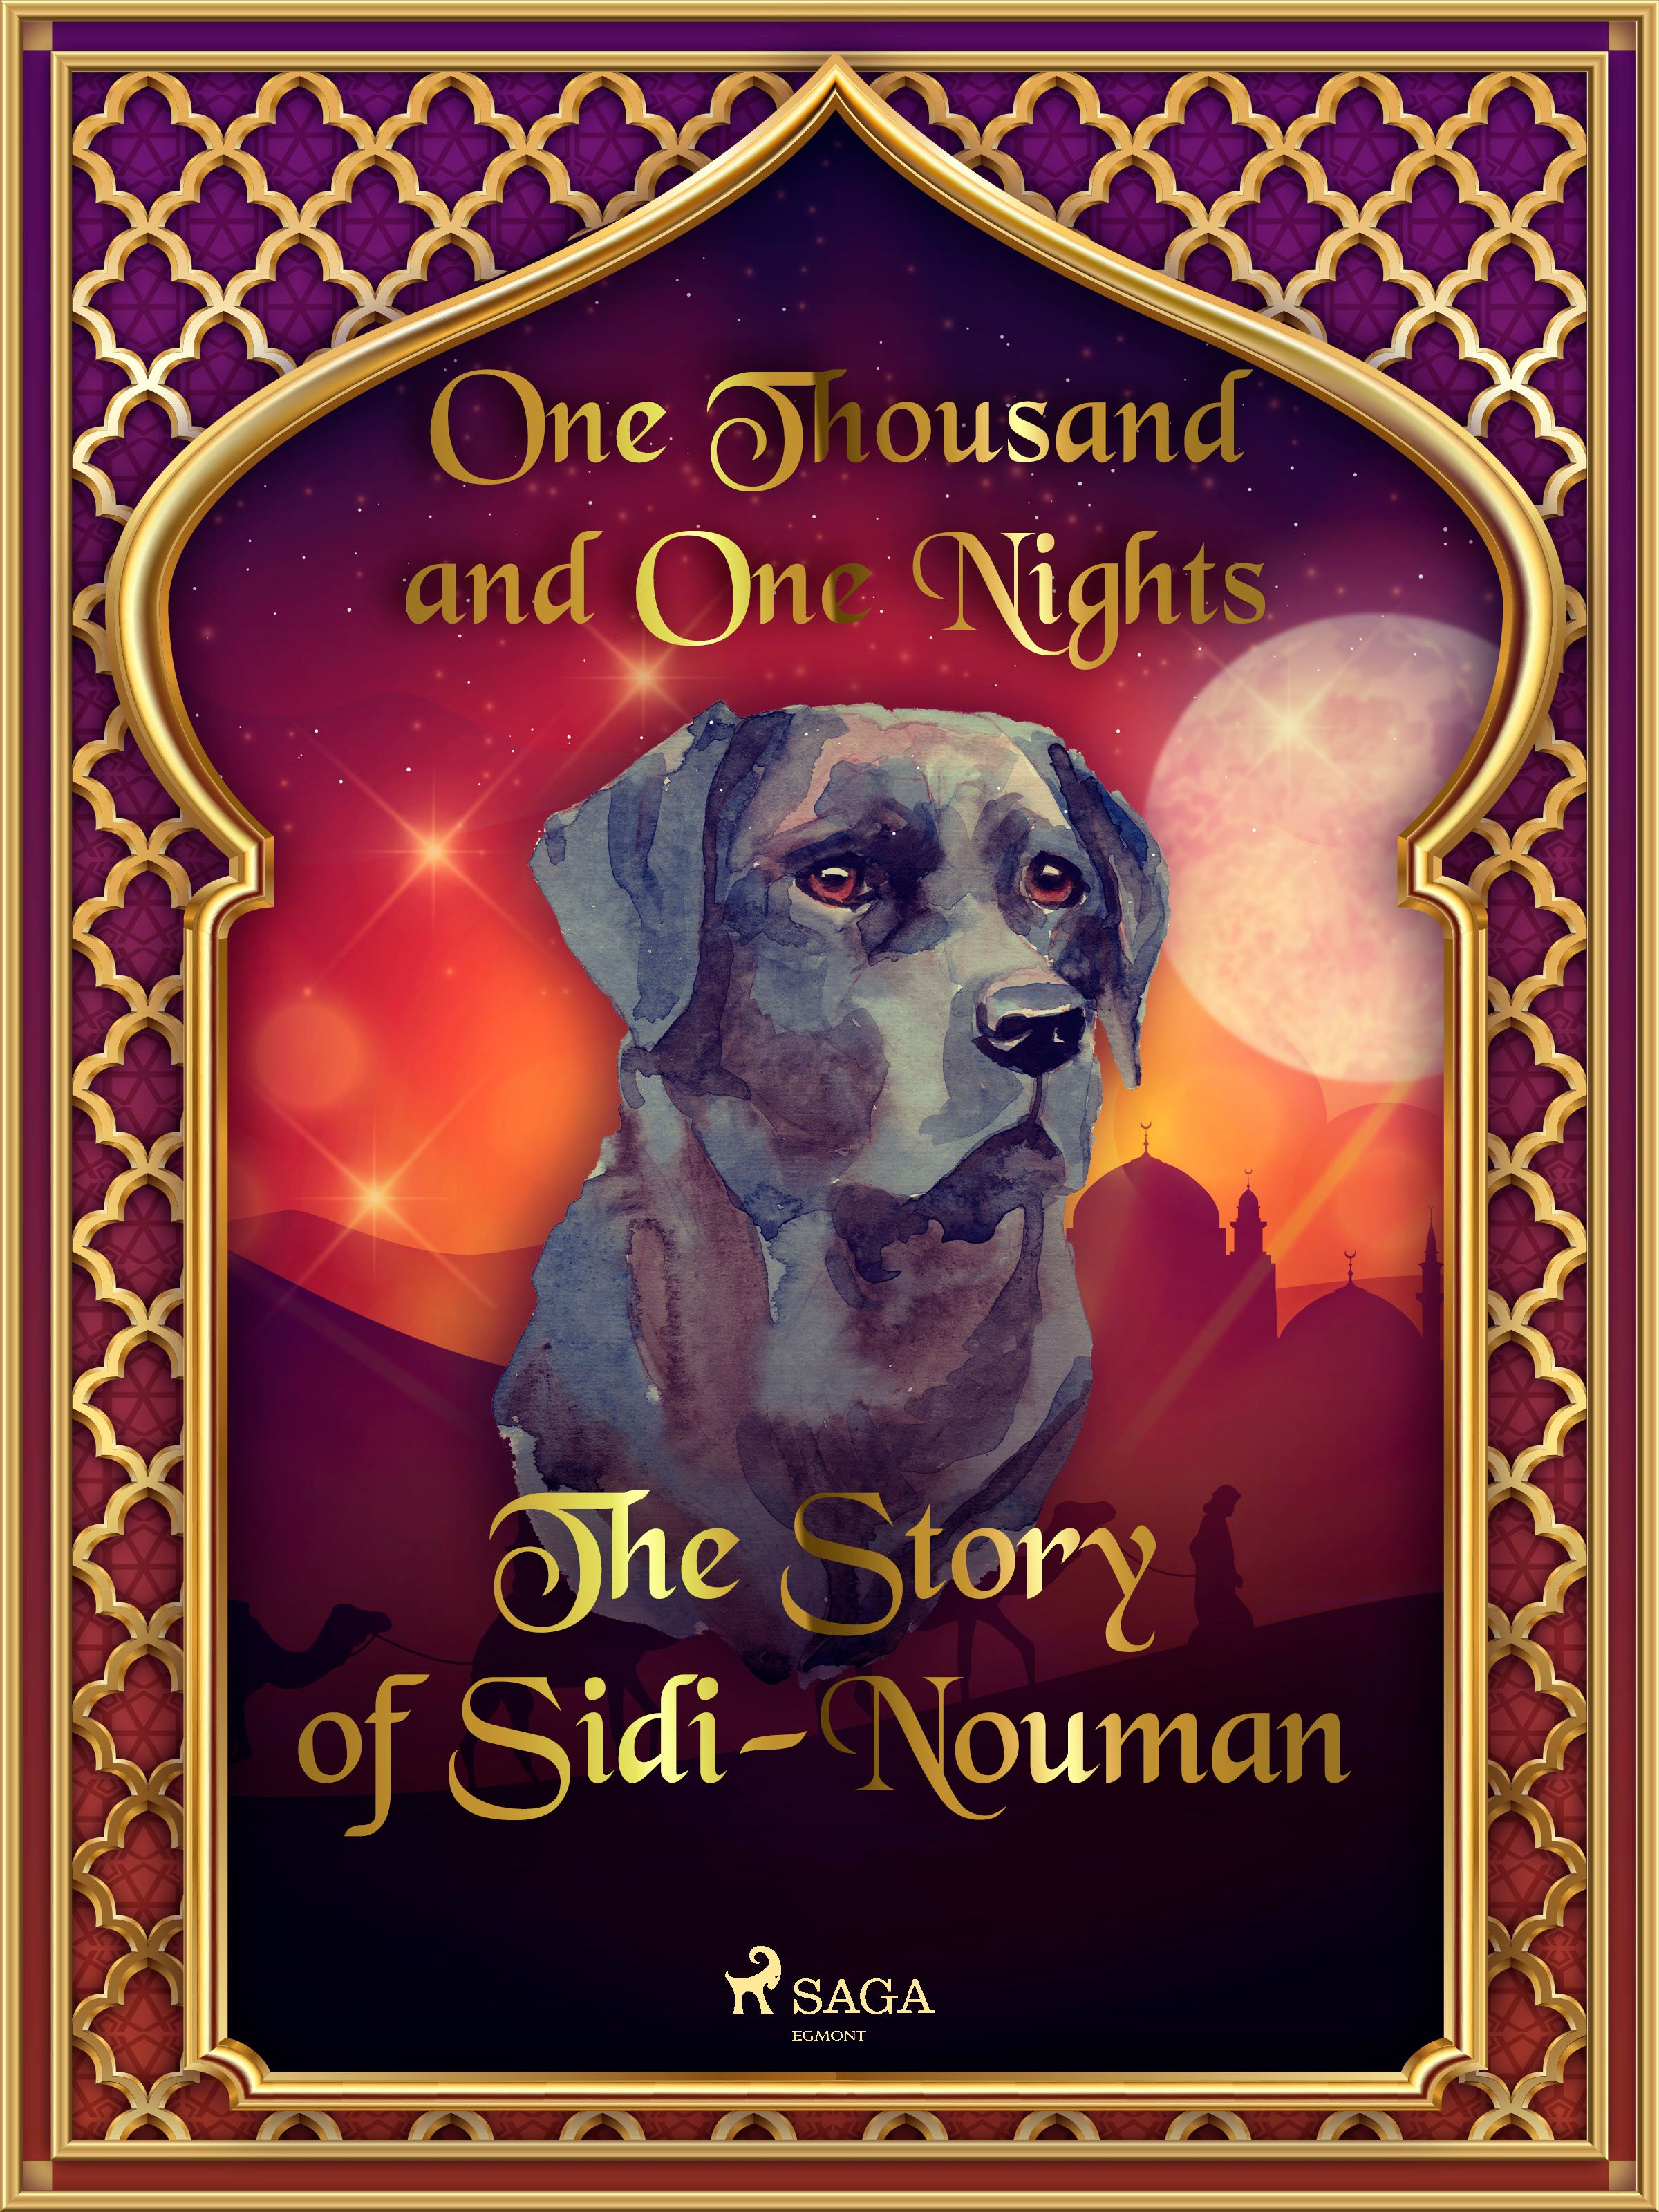 The Story of Sidi-Nouman, e-bog af One Thousand and One Nights